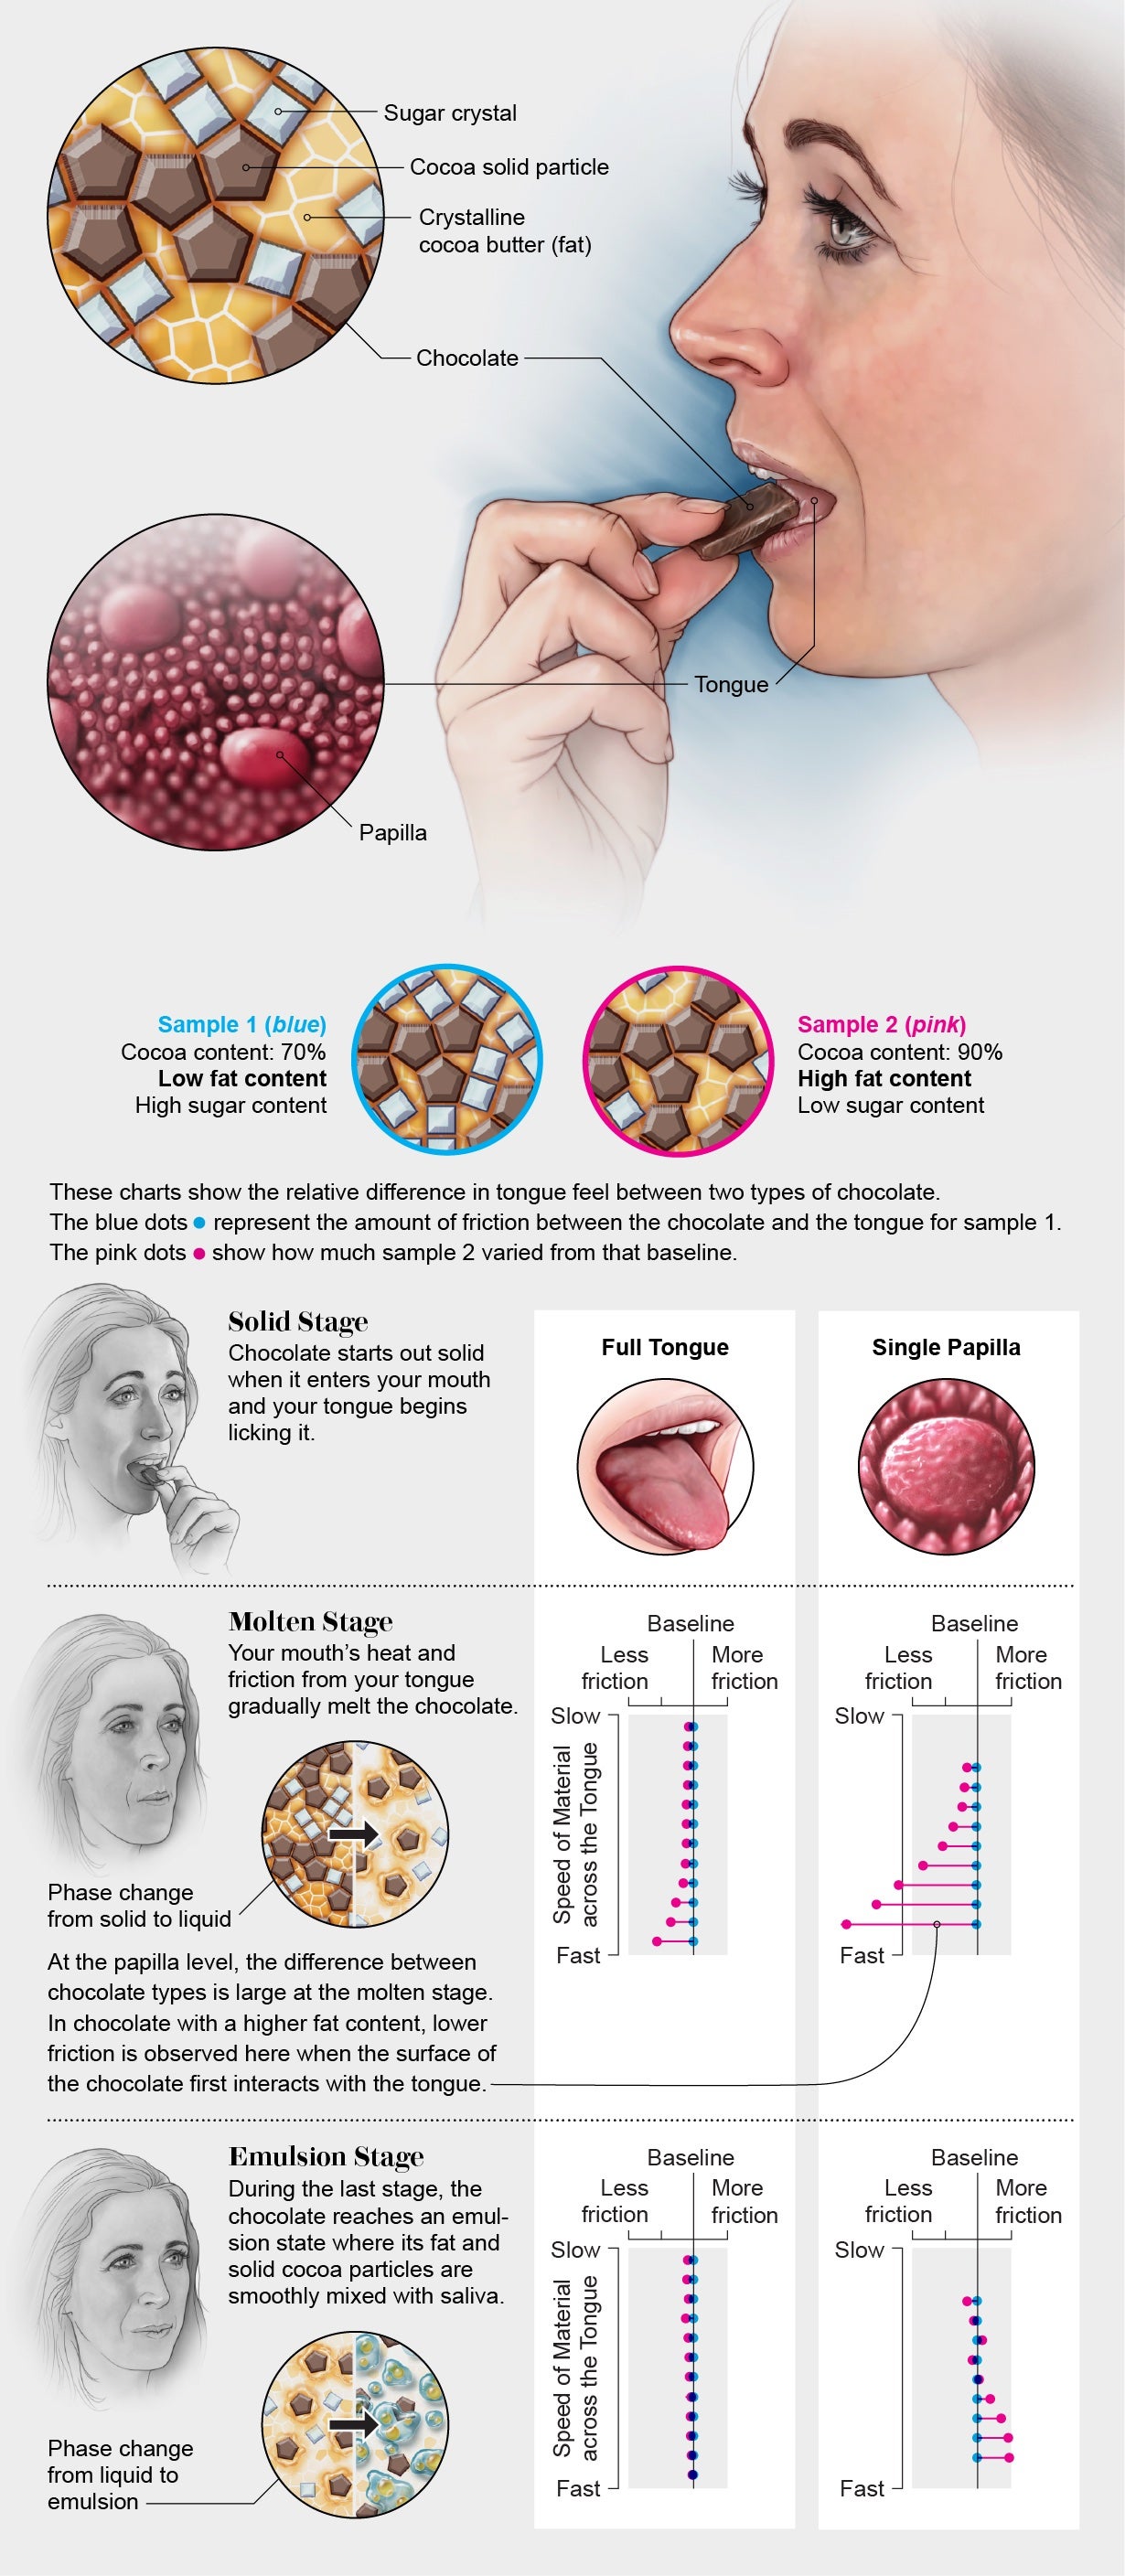 Graphic shows how chocolate goes from solid to molten to emulsion phase on the tongue and how different ratios of cocoa and fat affect the level of friction on the tongue during each of those stages.